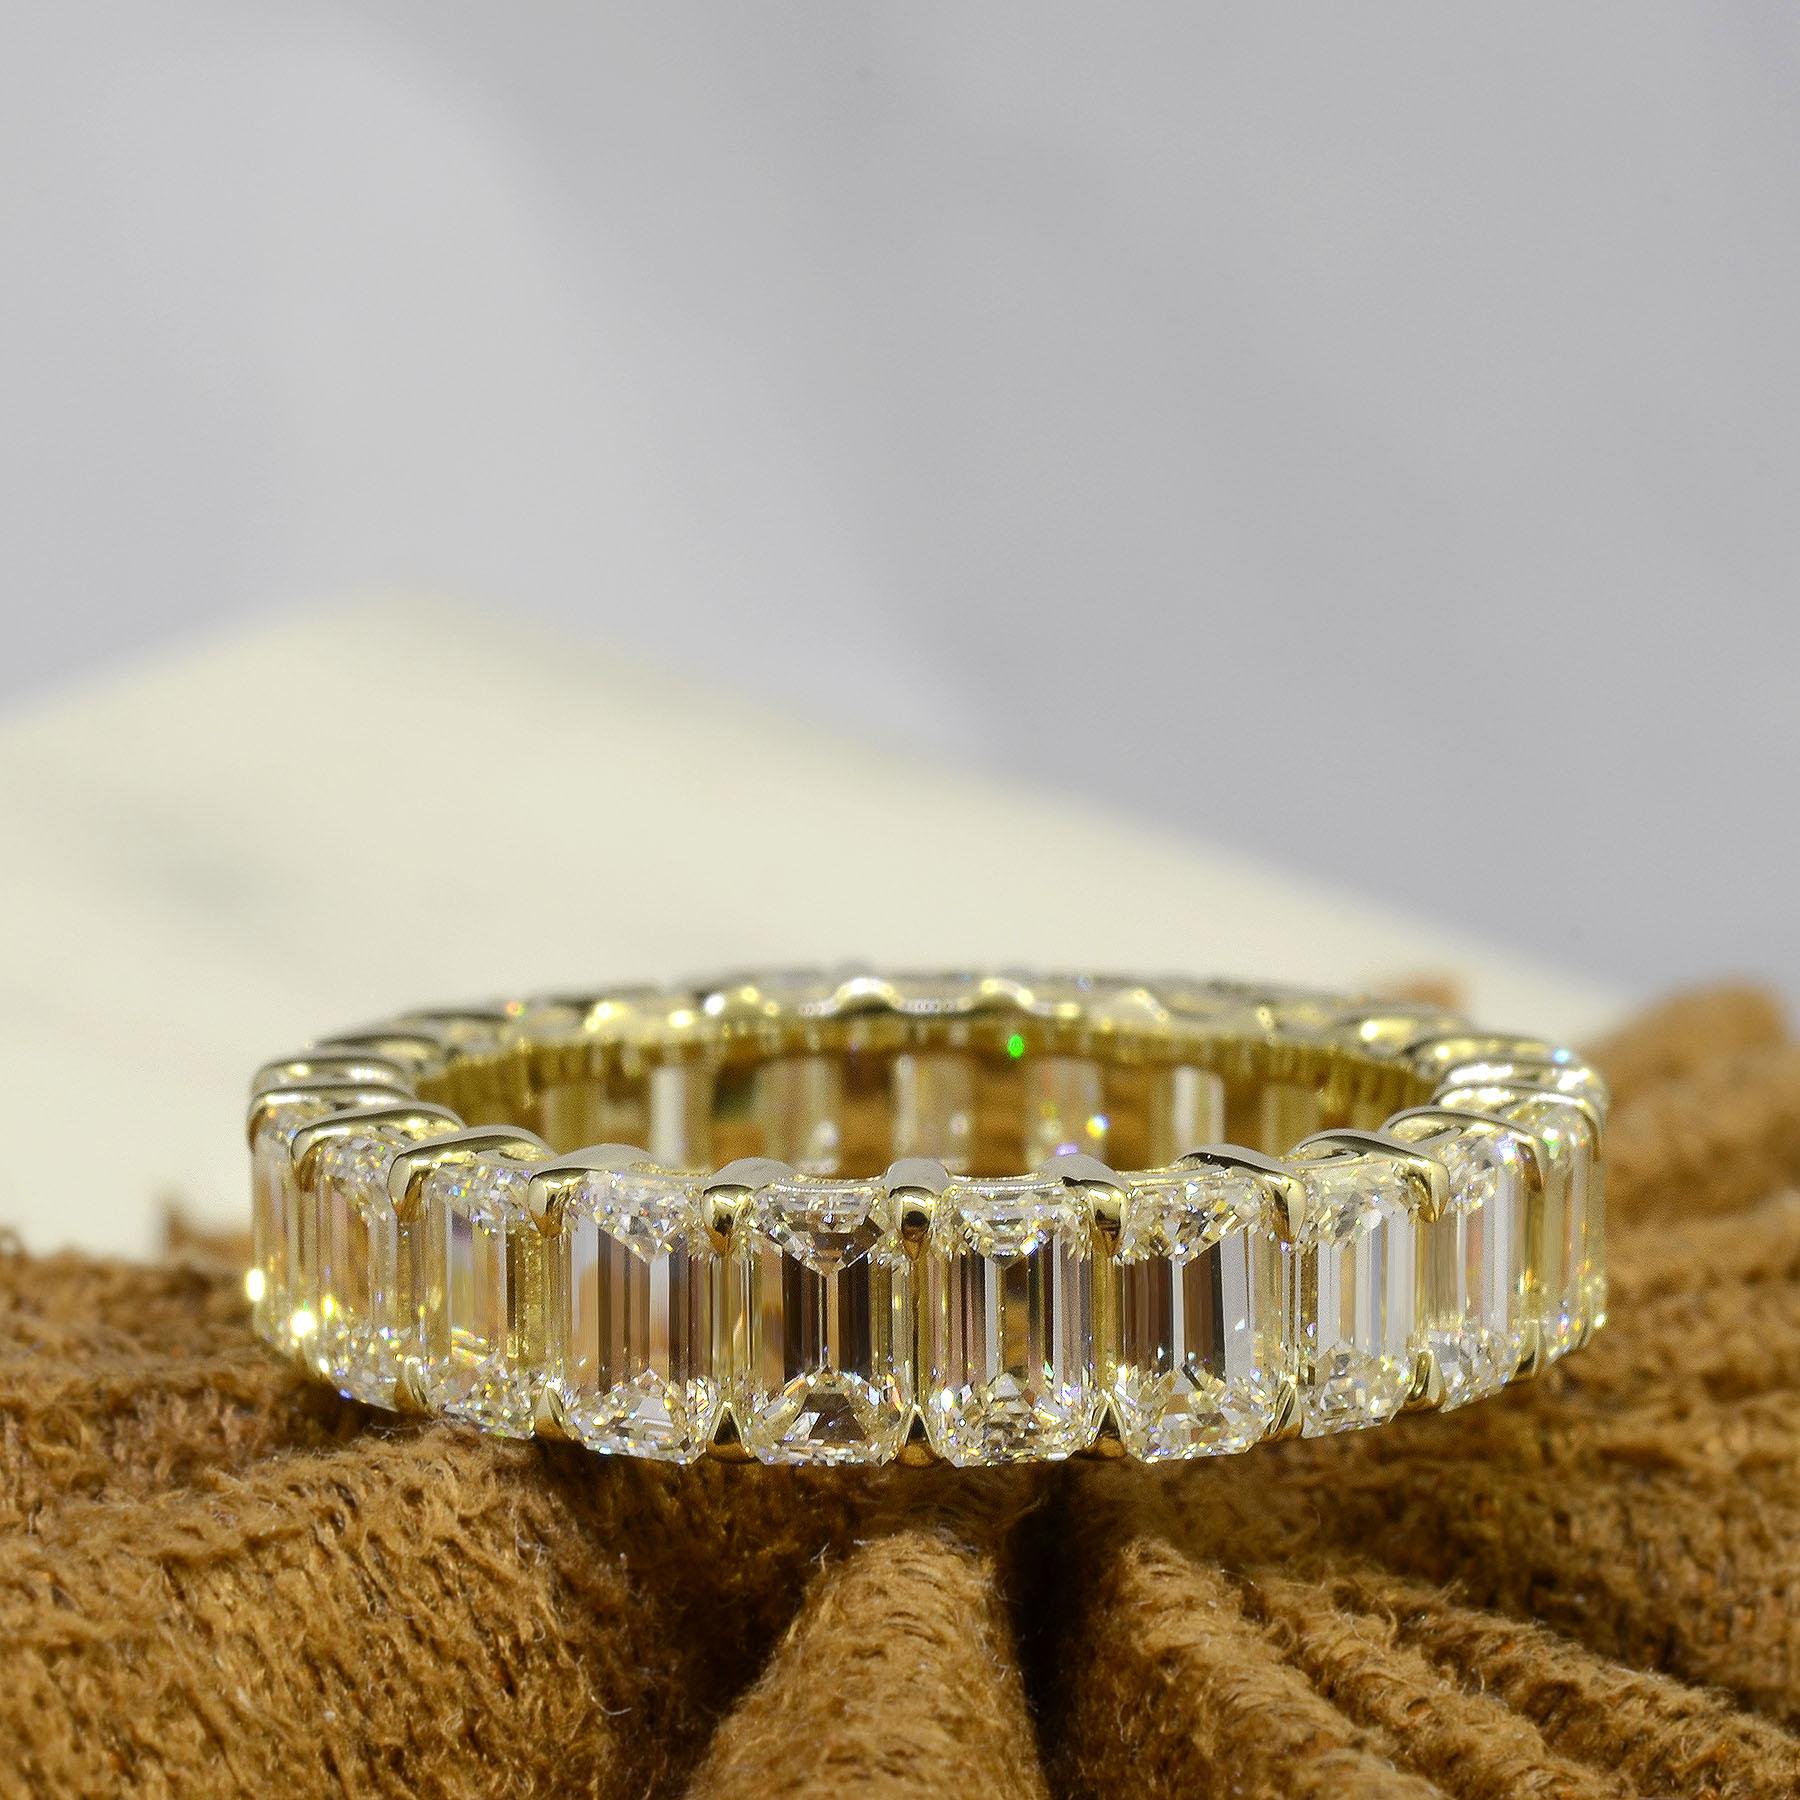 For Sale:  4 Carats Emerald Cut Eternity Band Shared Prong Style F-G Color VS1 Clarity 14k 8